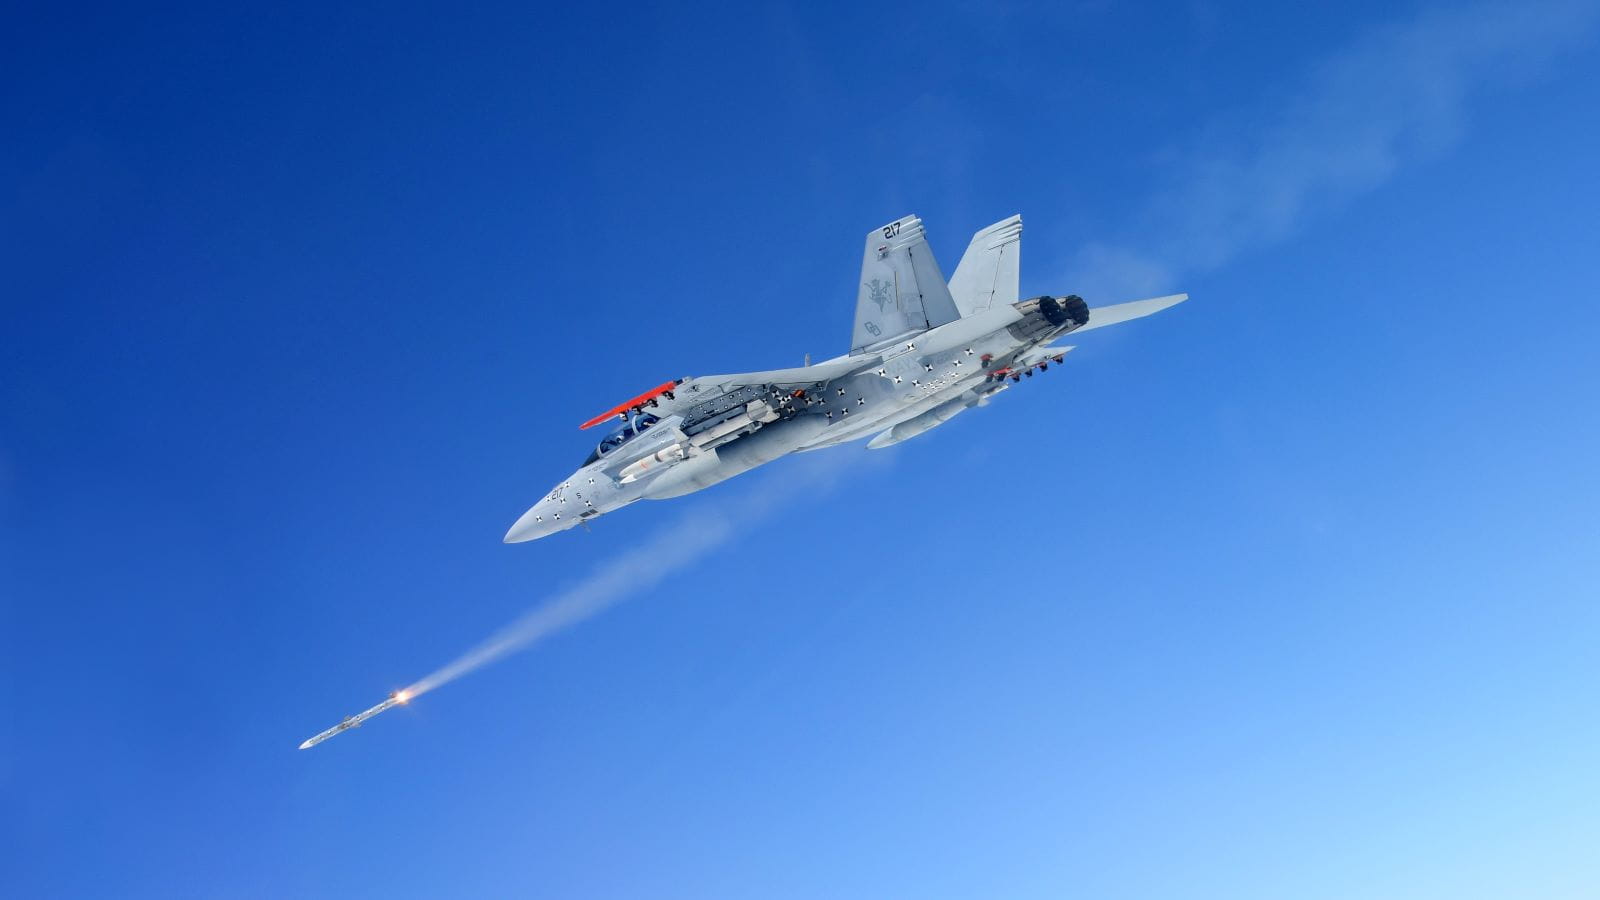 An AMRAAM missile is fired from a fighter jet